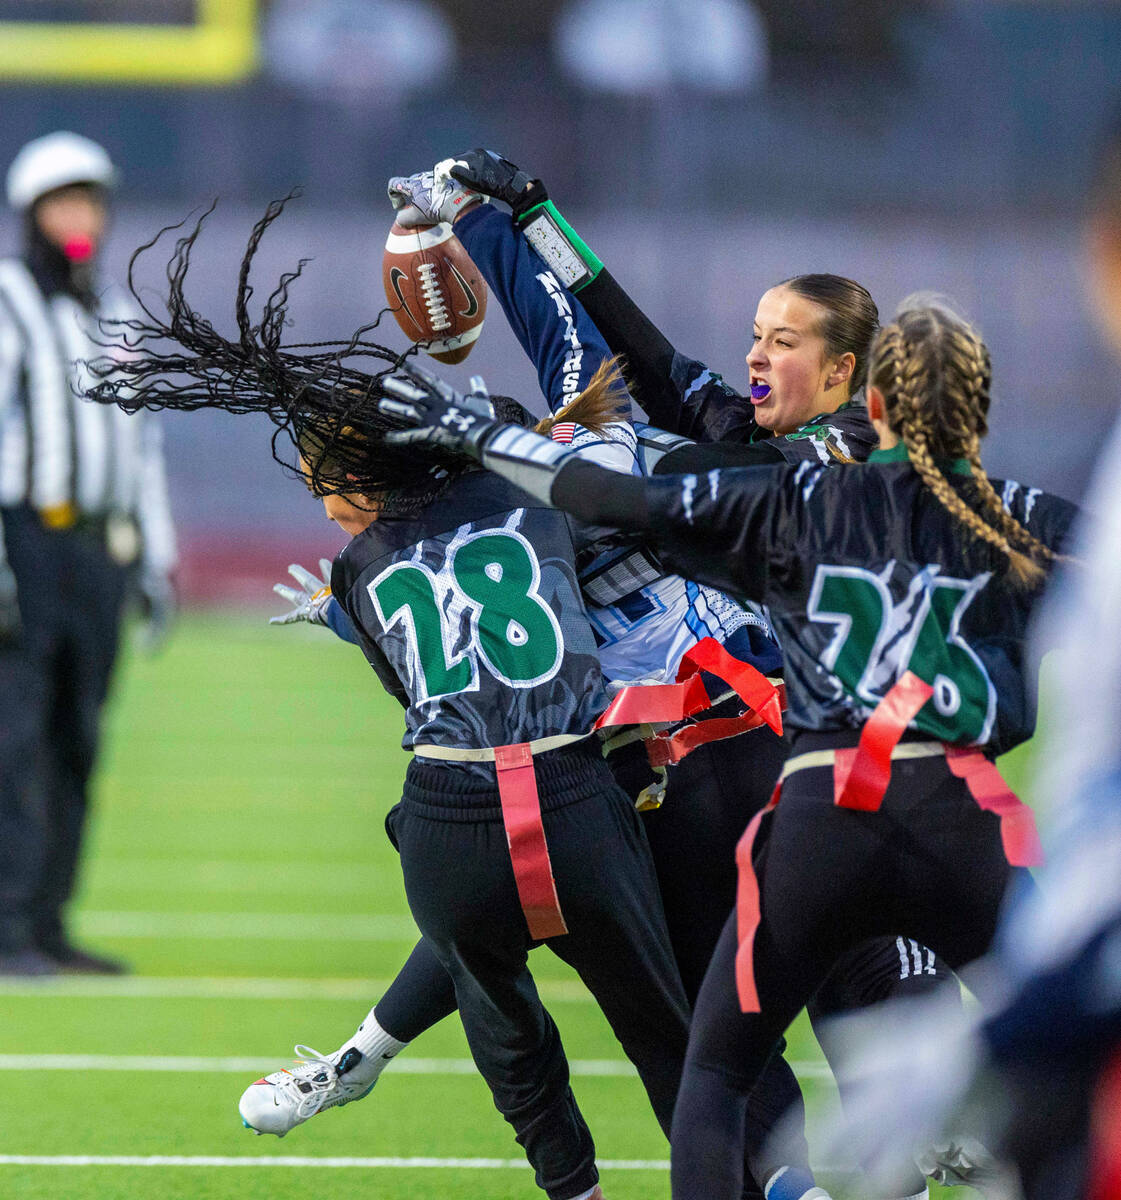 Palo Verde defender Madison Miller (28) and teammates break up a pass to Centennial receiver As ...